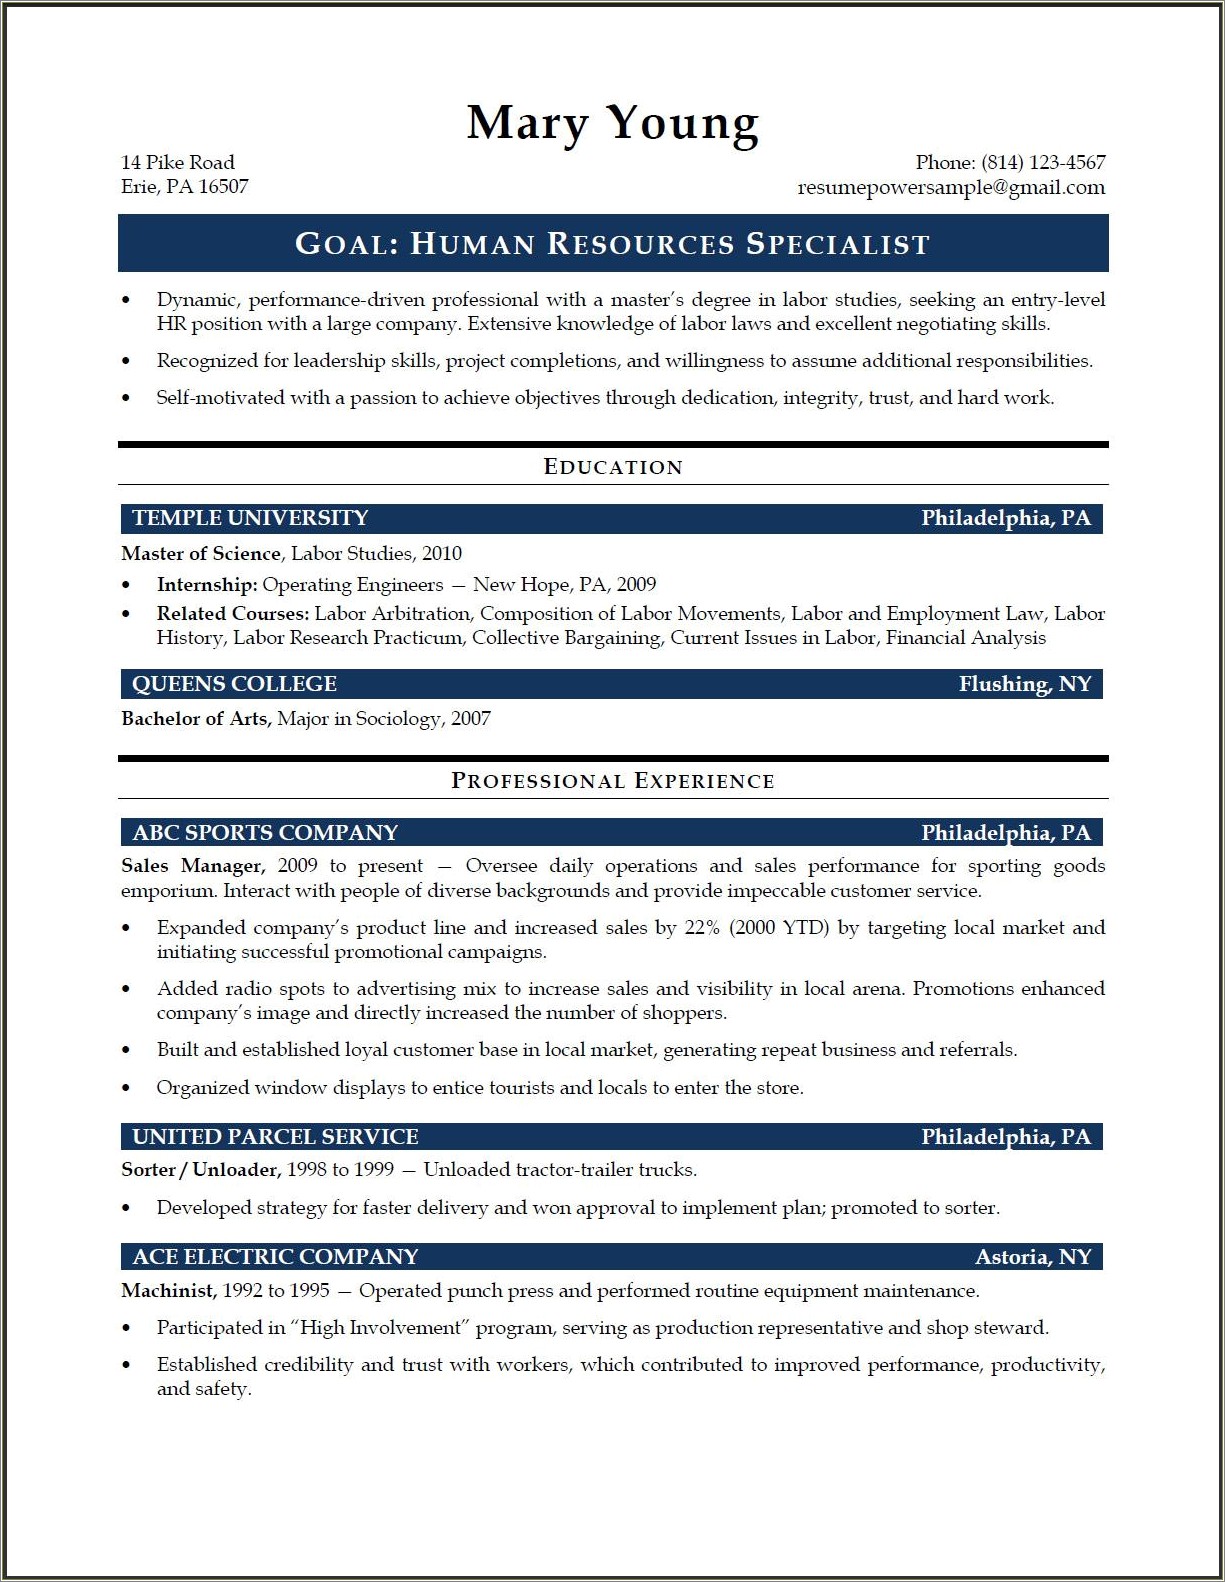 Objective For A Human Resources Resume